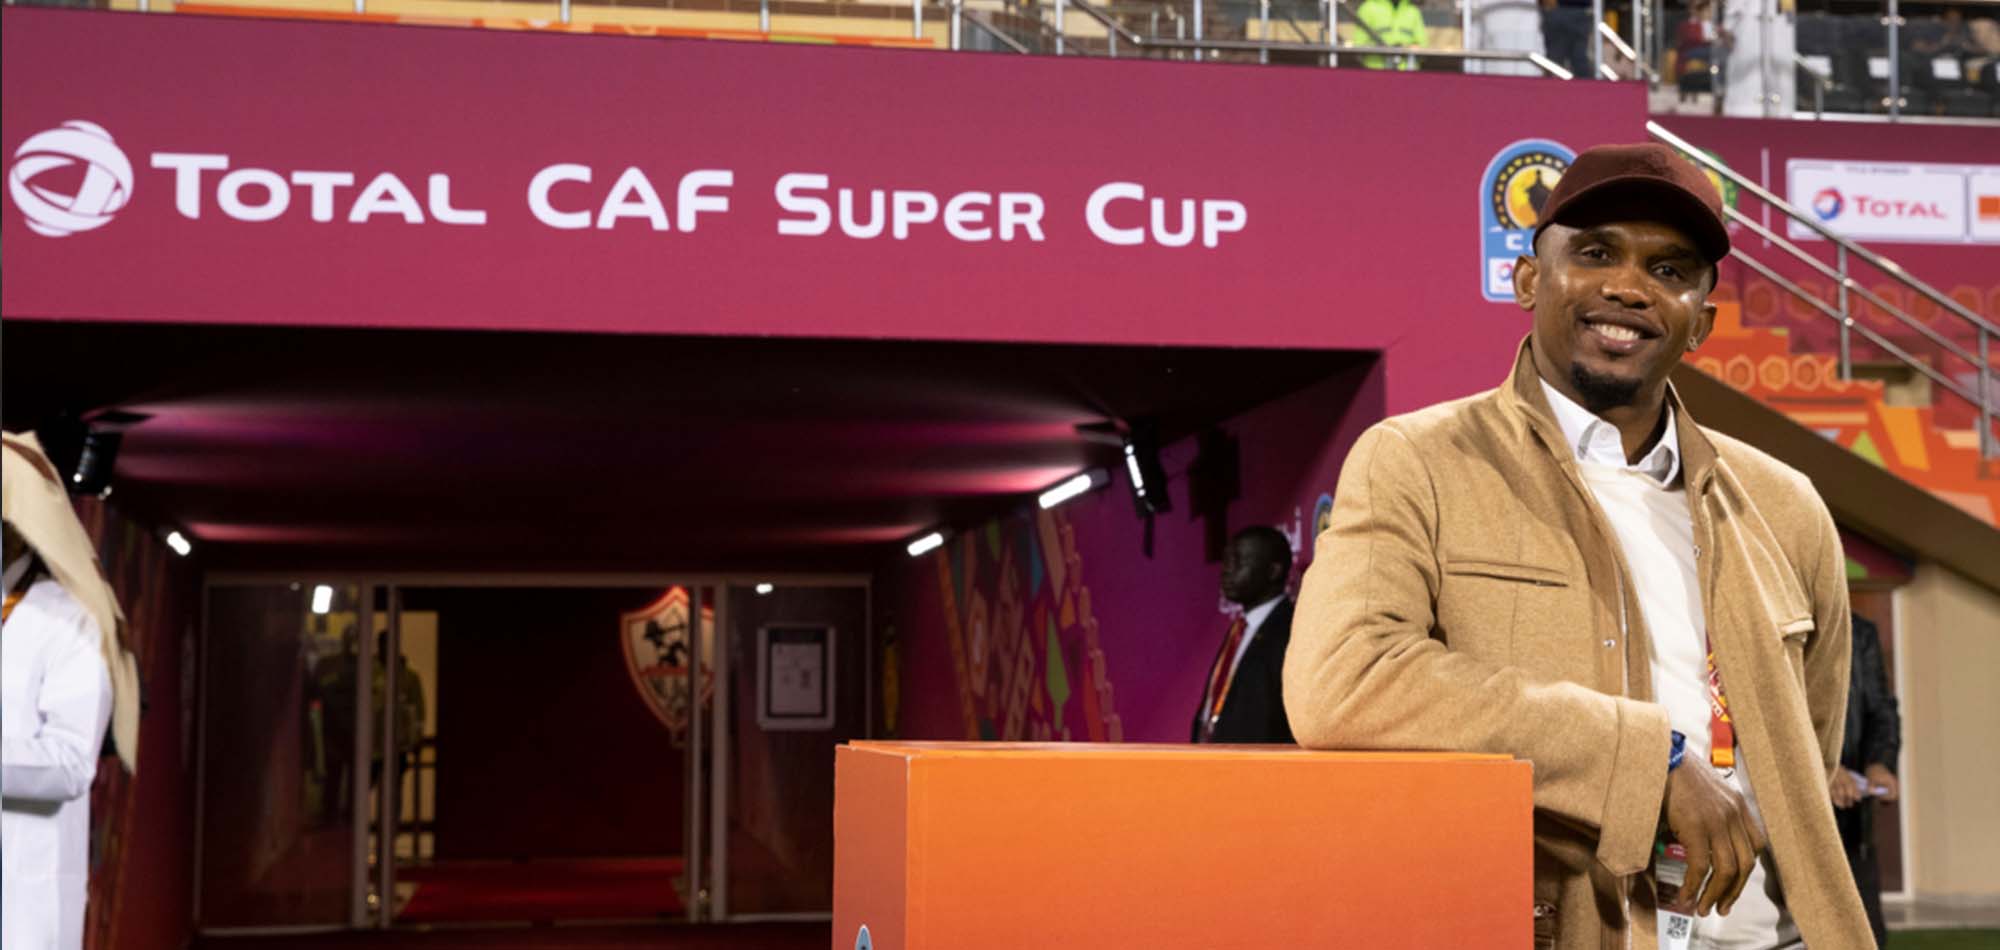 Samuel Eto’o describes hosting CAF Super Cup in Doha as beneficial for all